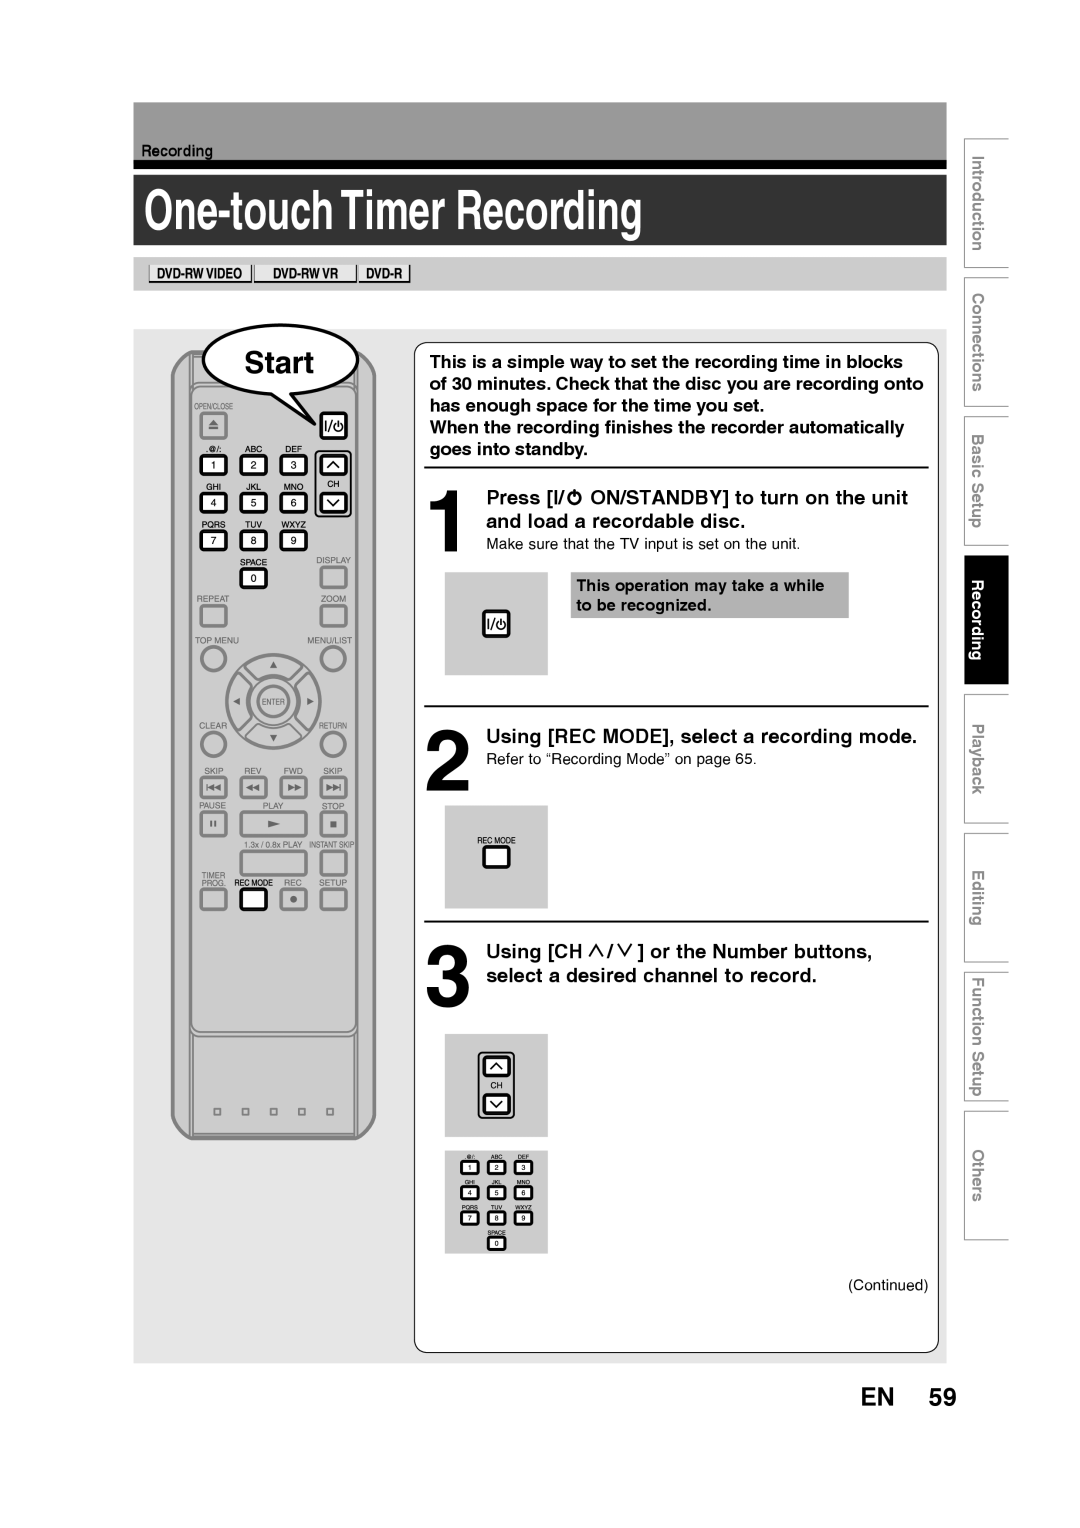 Toshiba D-RW2SU/D-RW2SC One-touch Timer Recording, Press I/y ON/STANDBY to turn on the unit and load a recordable disc 